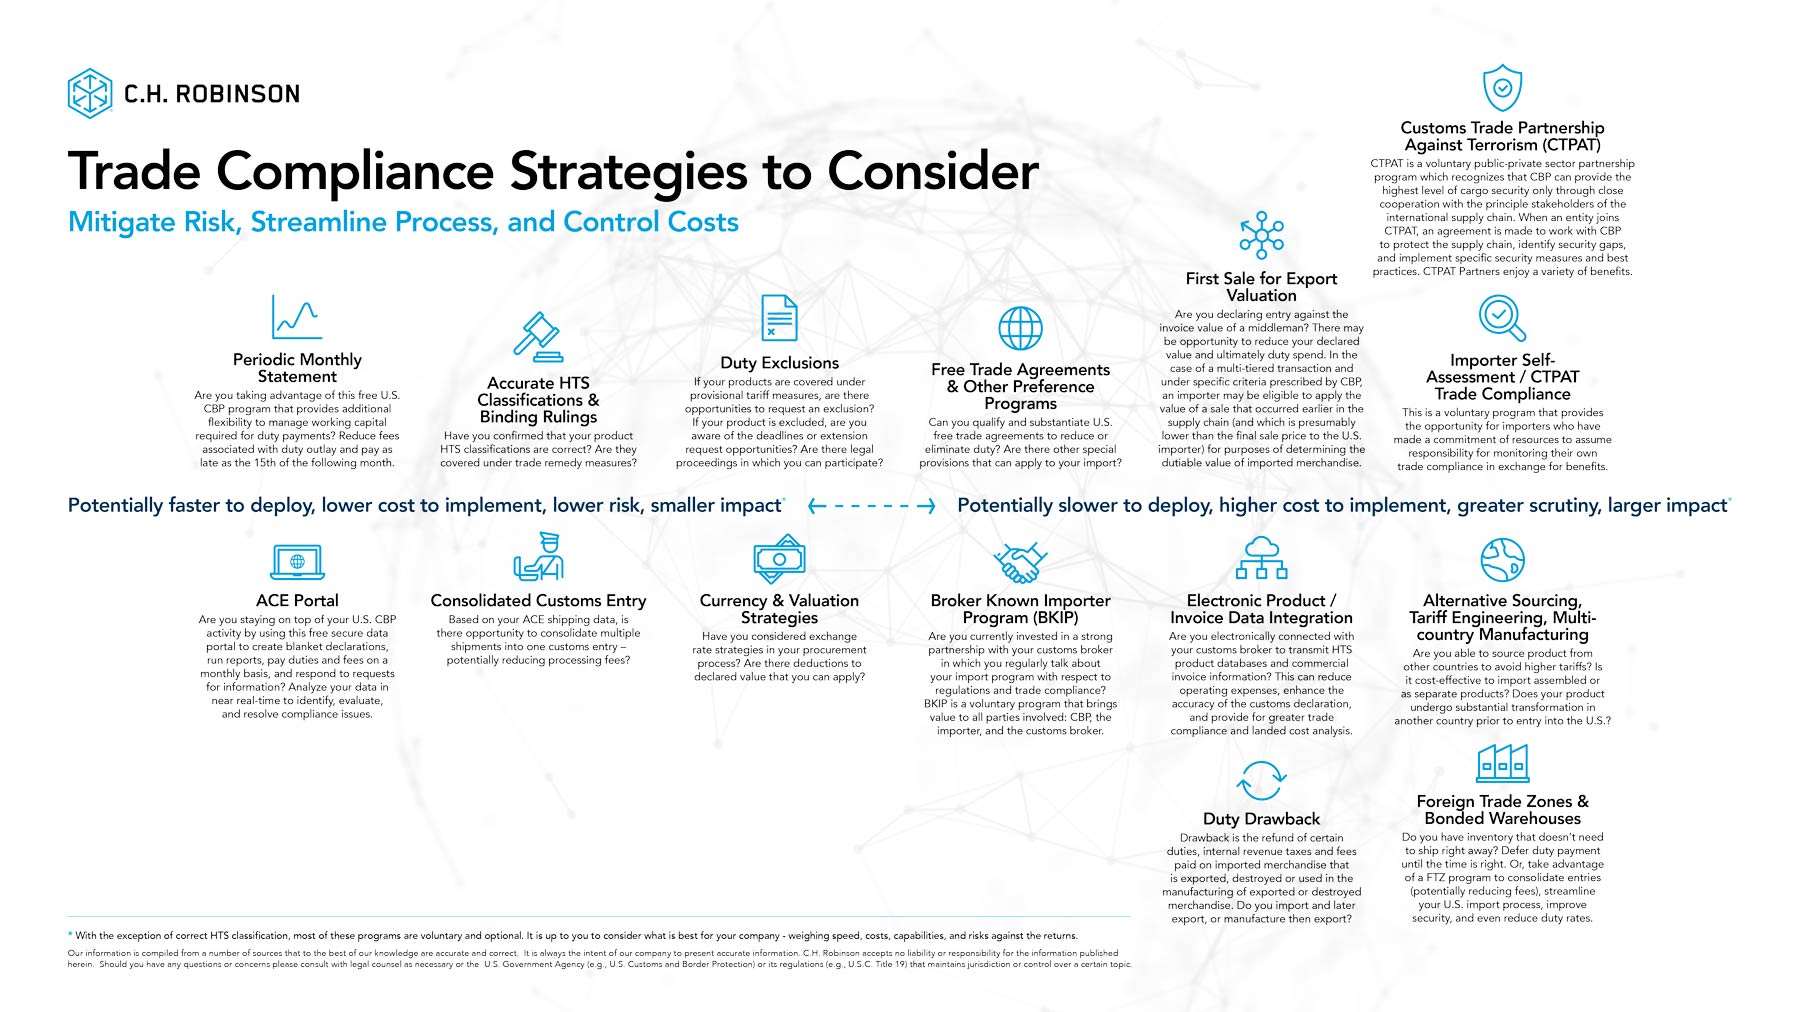 Trade compliance strategies to consider